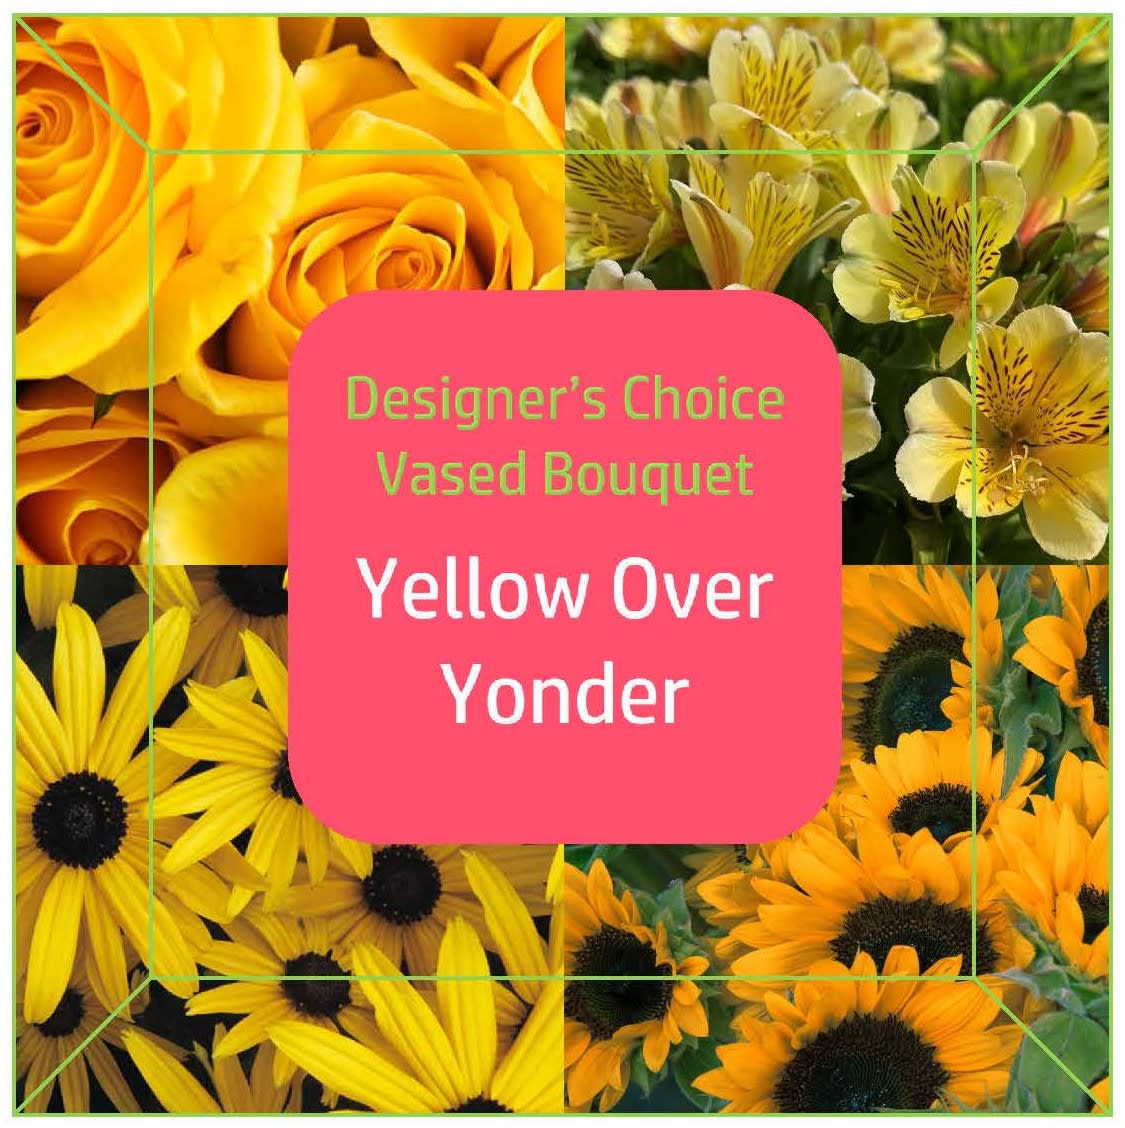 Designer's Choice (Vased) Yellow Over Yonder - Send a made-on-the-spot fresh floral bouquet filled with warm and bright yellow blooms! Our expert designer will hand-select the freshest of our seasonal blooms and design them into a beautiful yellow-themed arrangement! Sizes and colors will vary. If you want us to avoid any type of flower, please leave a note in the special instructions.